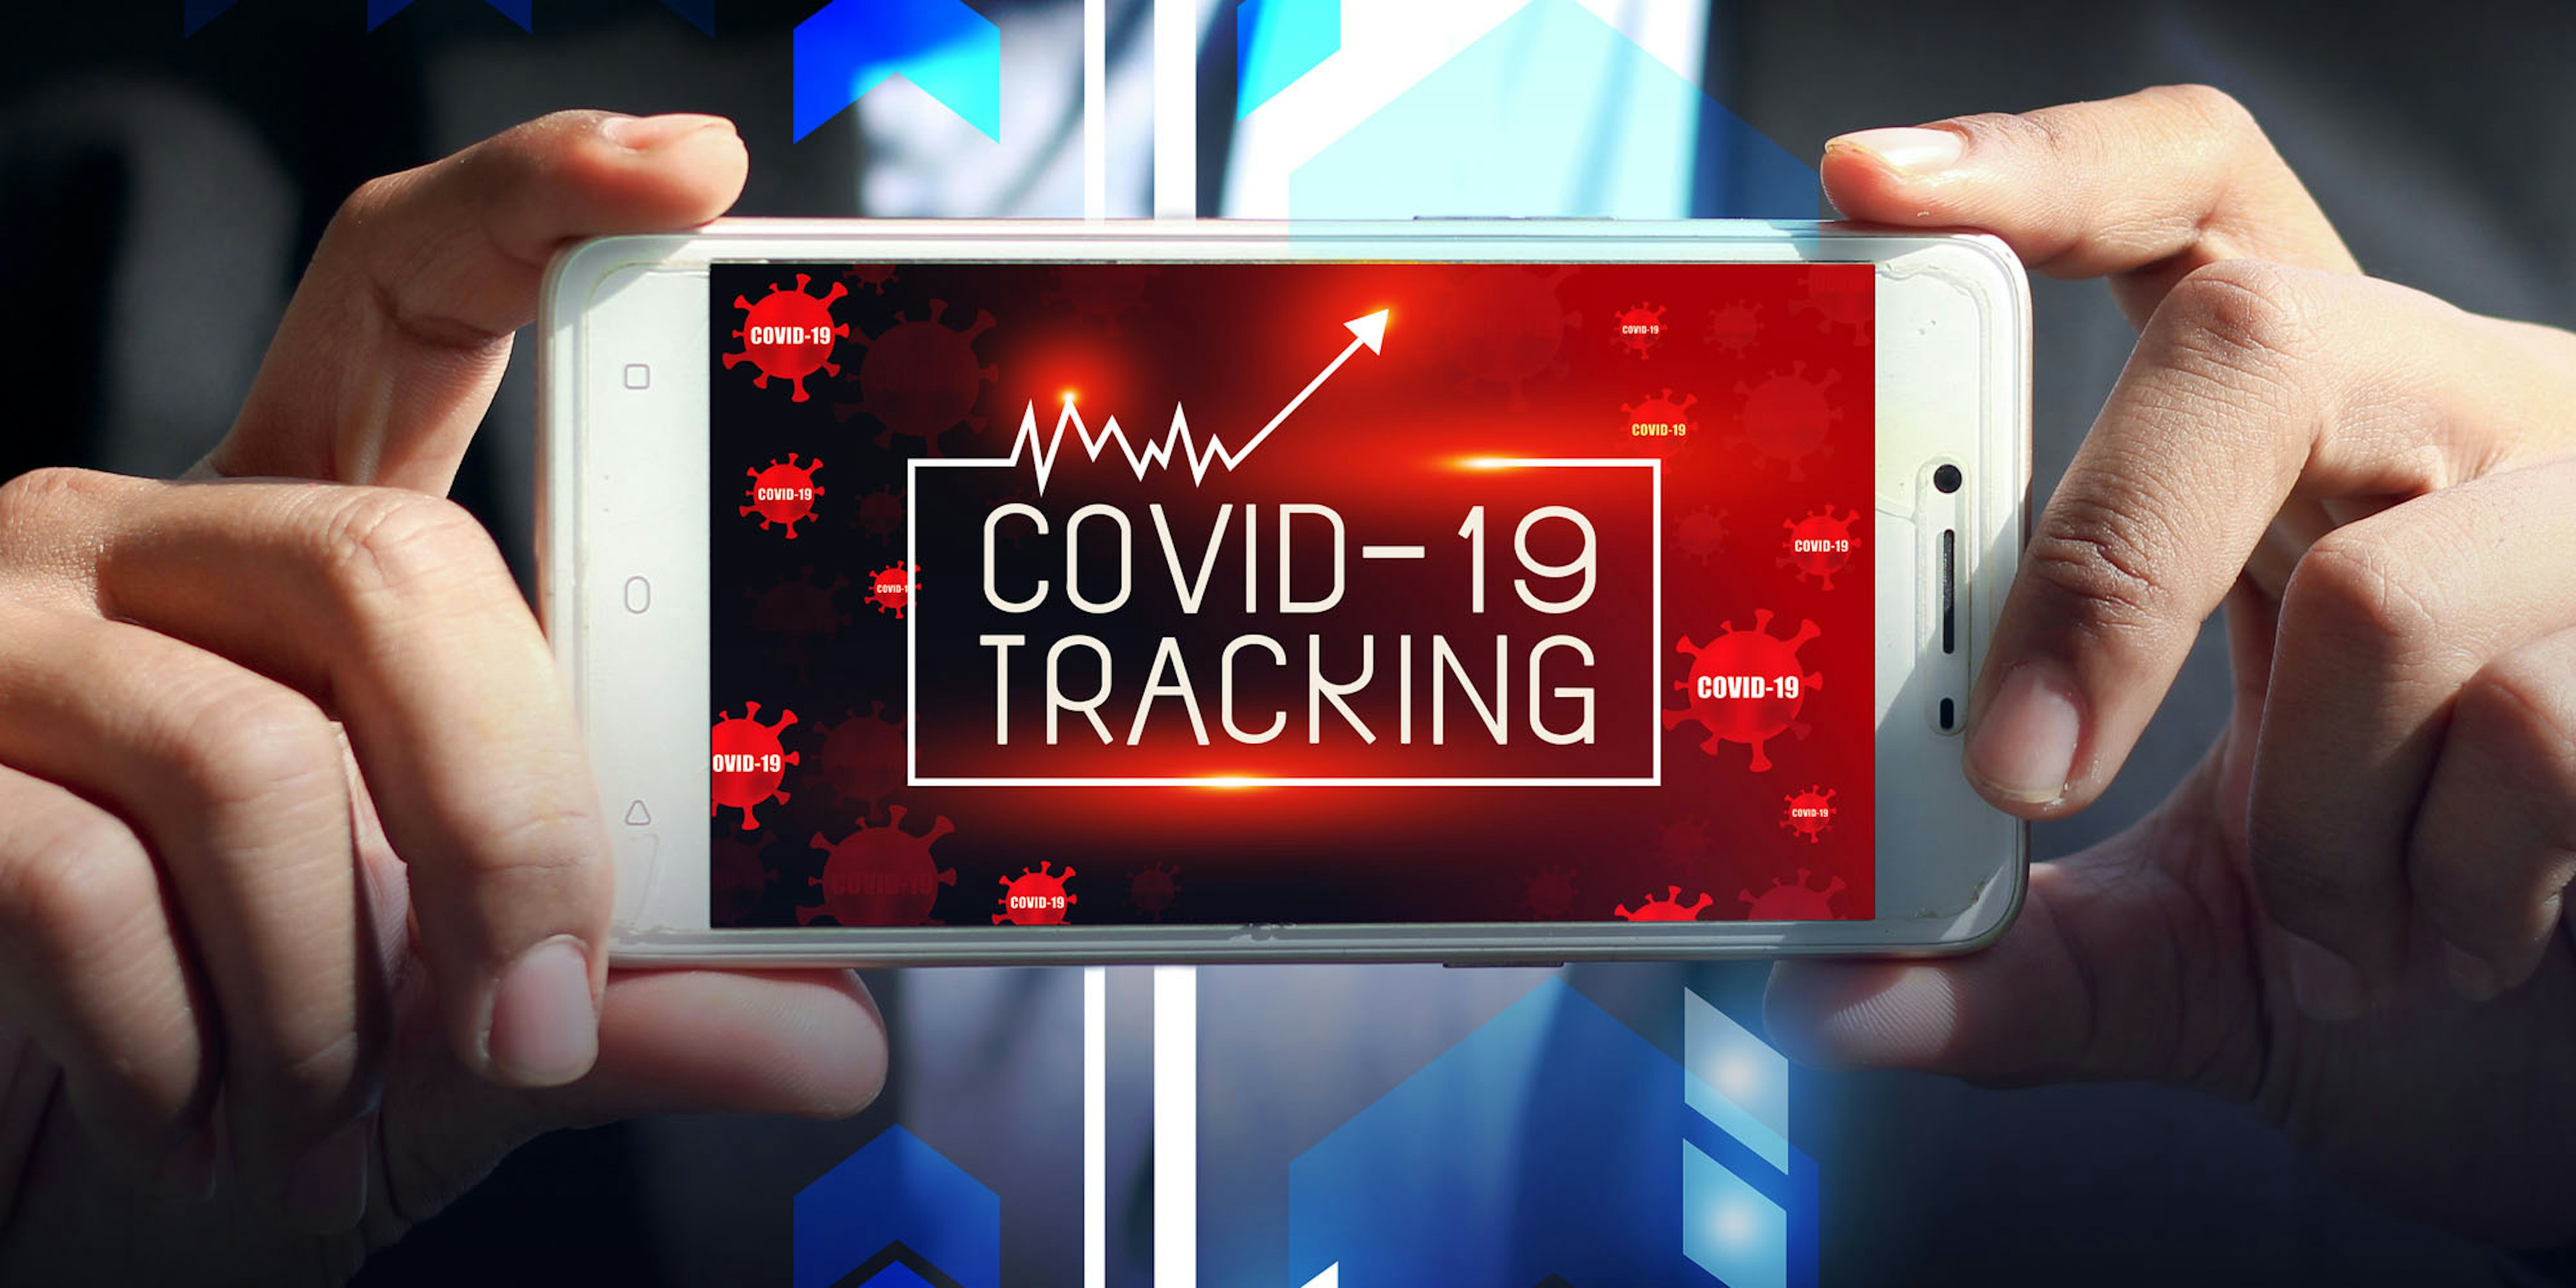 man in suit hands holding phone that says COVID-19 tracker